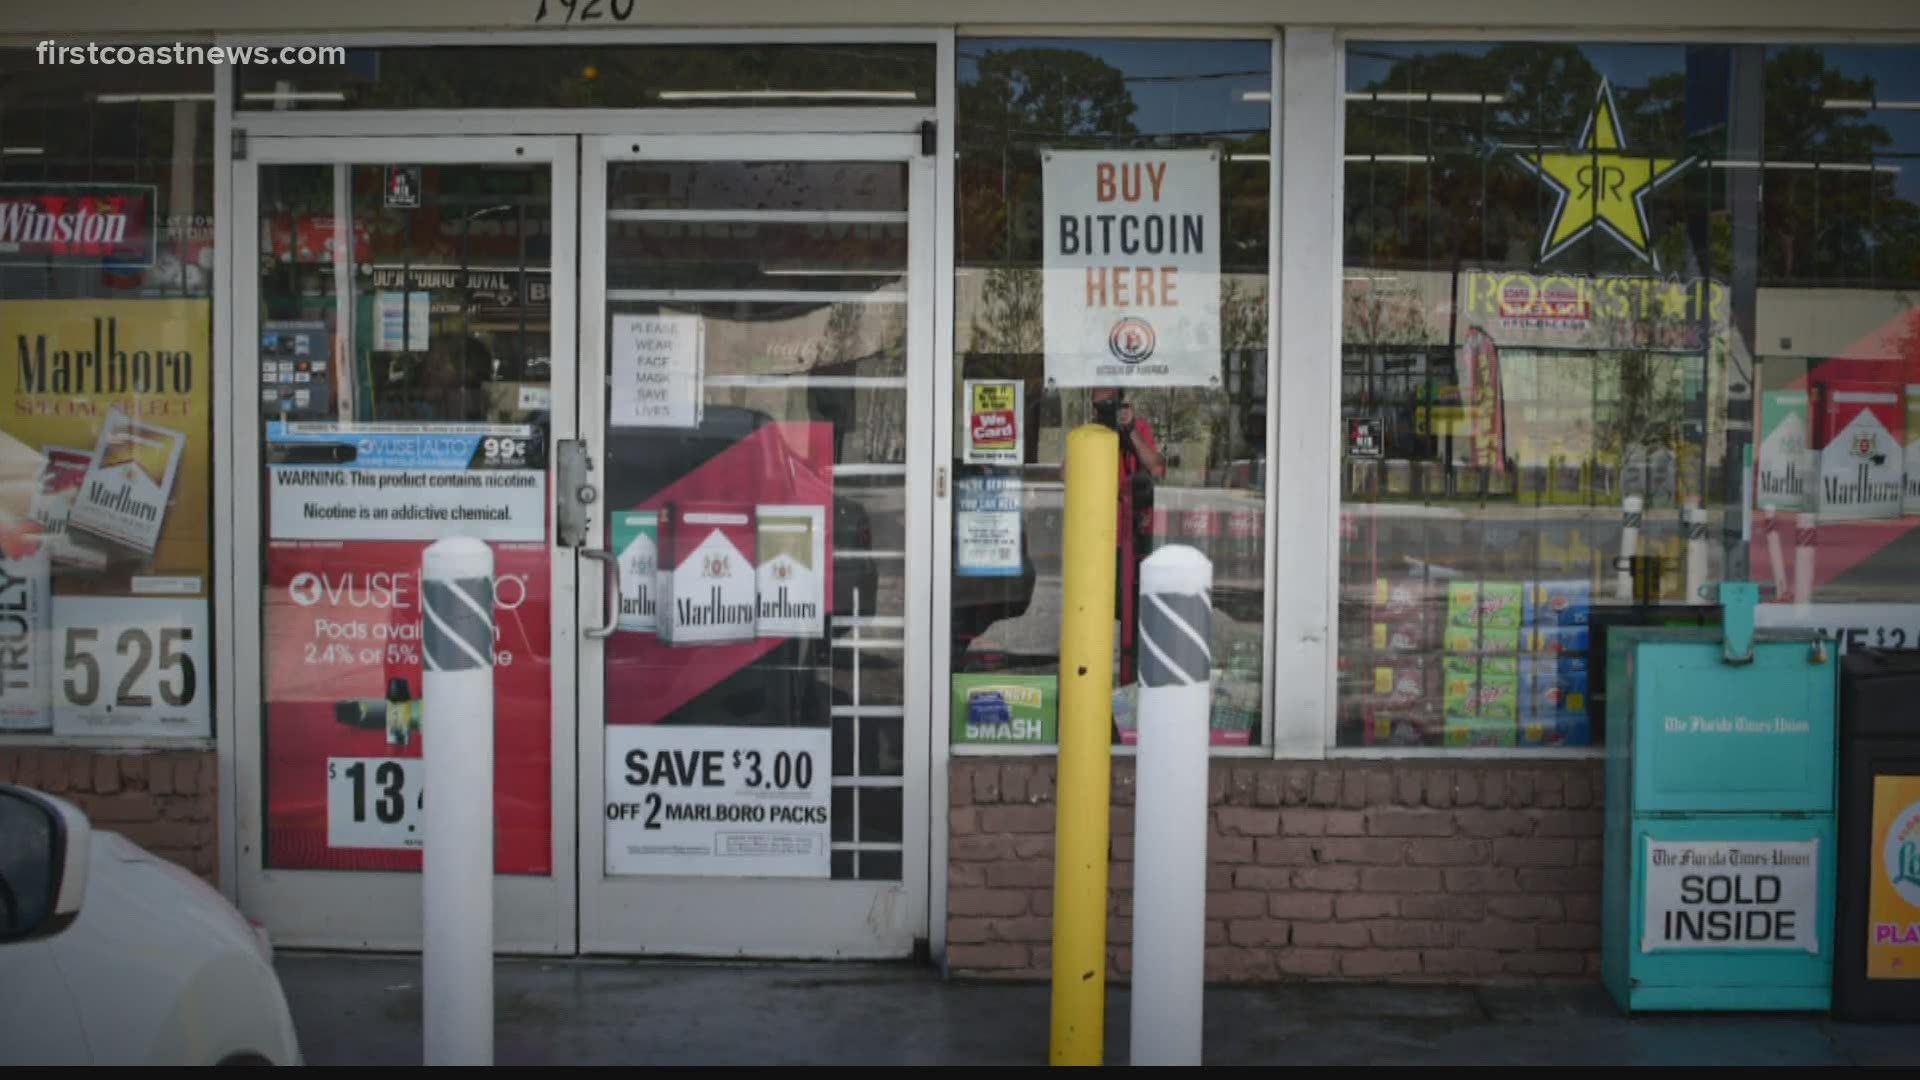 Bitcoin ATMs are now found at dozens of modest storefronts, offering a portal to digital finance and a path to illicit activity.